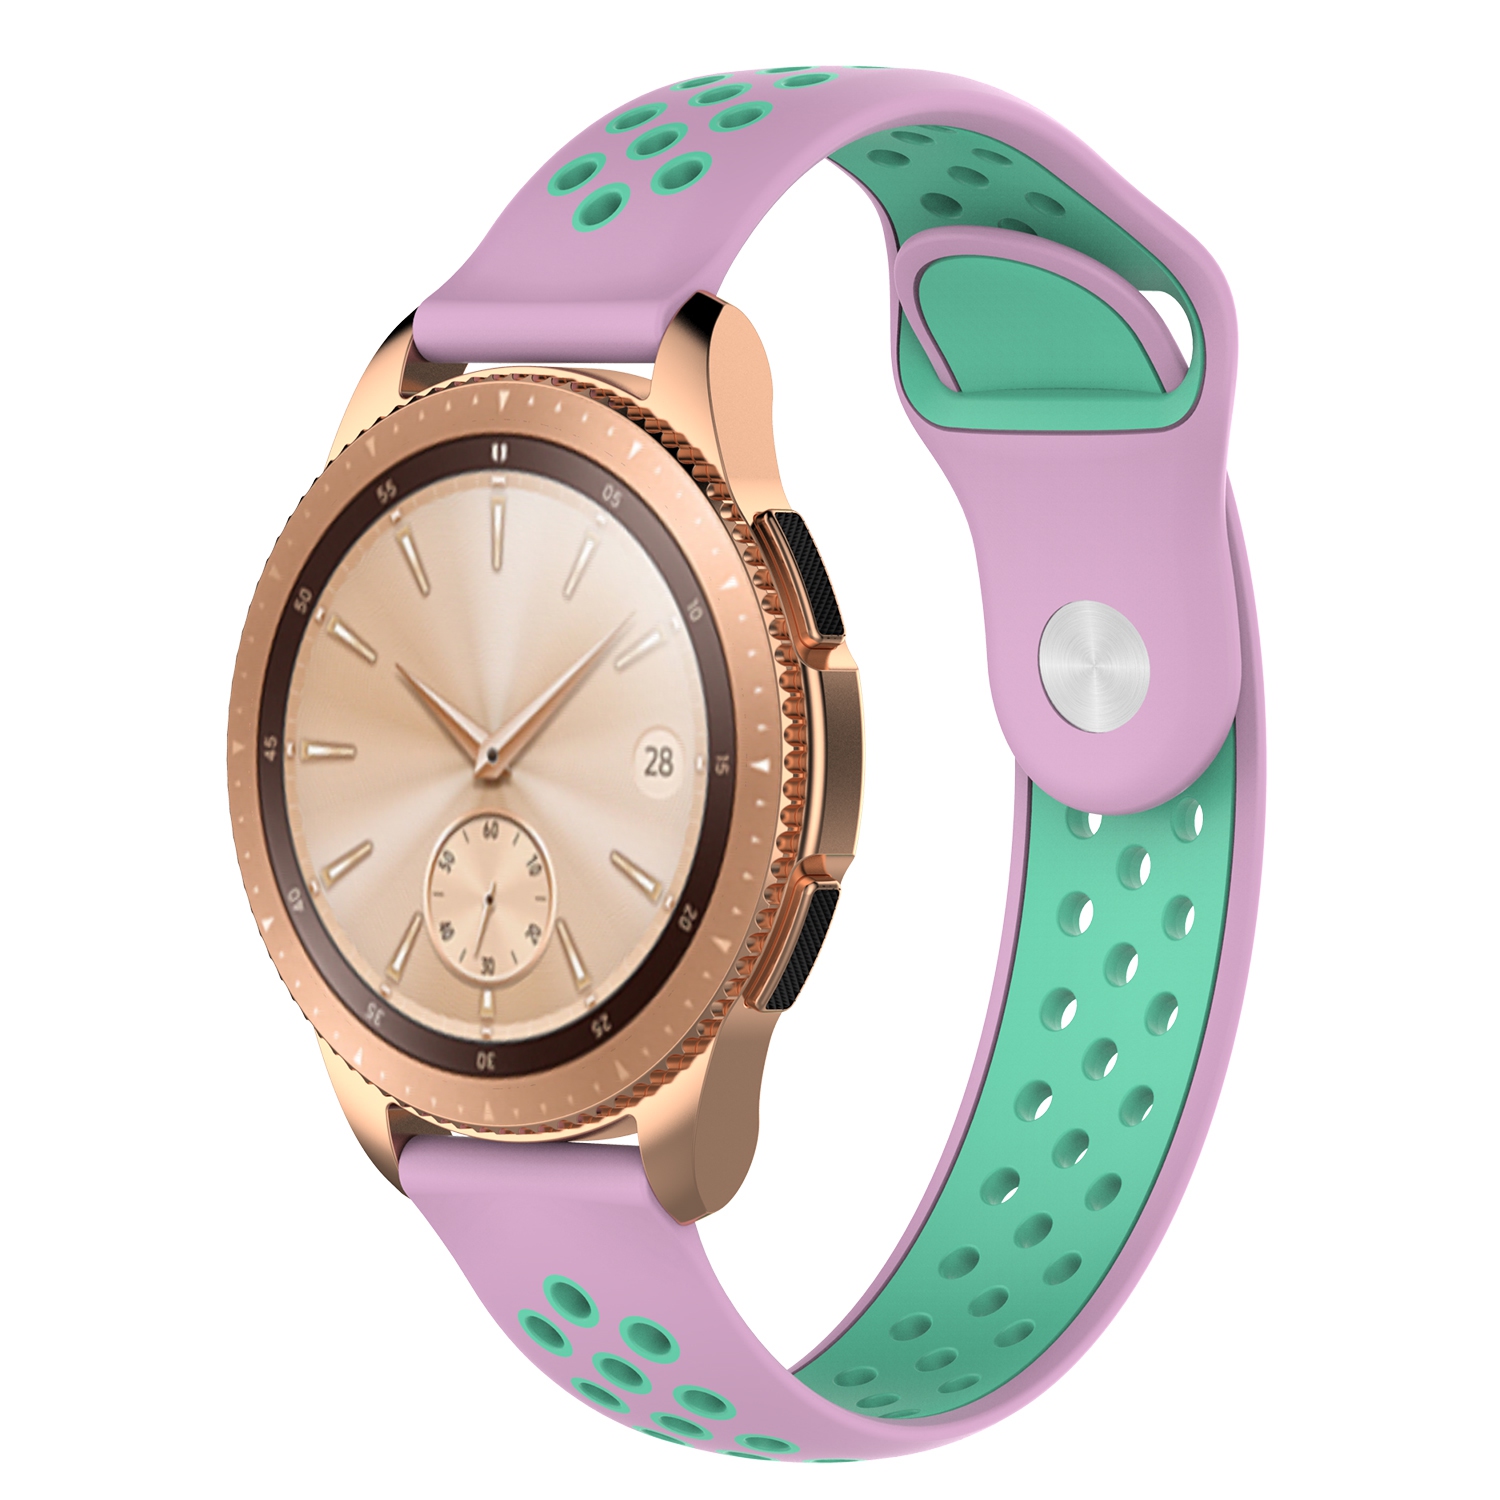 StrapsCo Perforated Silicone Rubber 22mm Watch Band Strap for Michael Kors  Bradshaw - Pink & Mint Green | Best Buy Canada